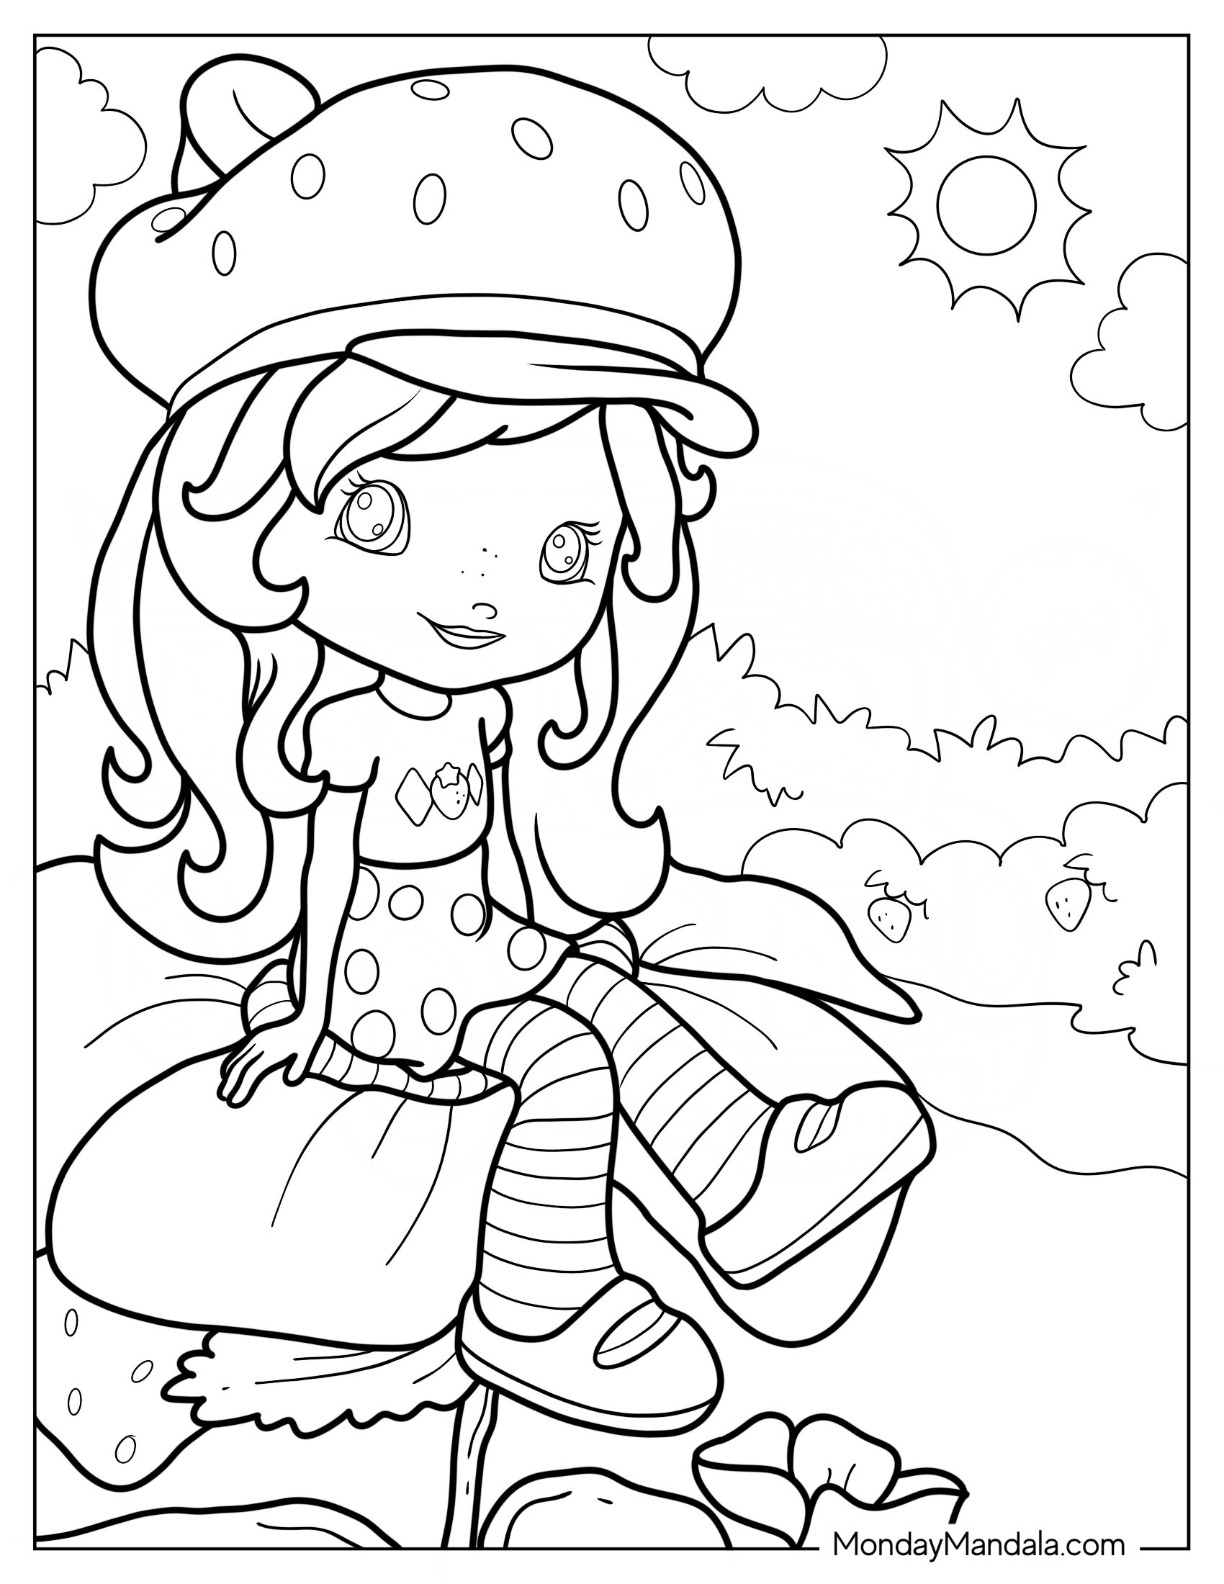 Strawberry shortcake coloring pages free pdf printables